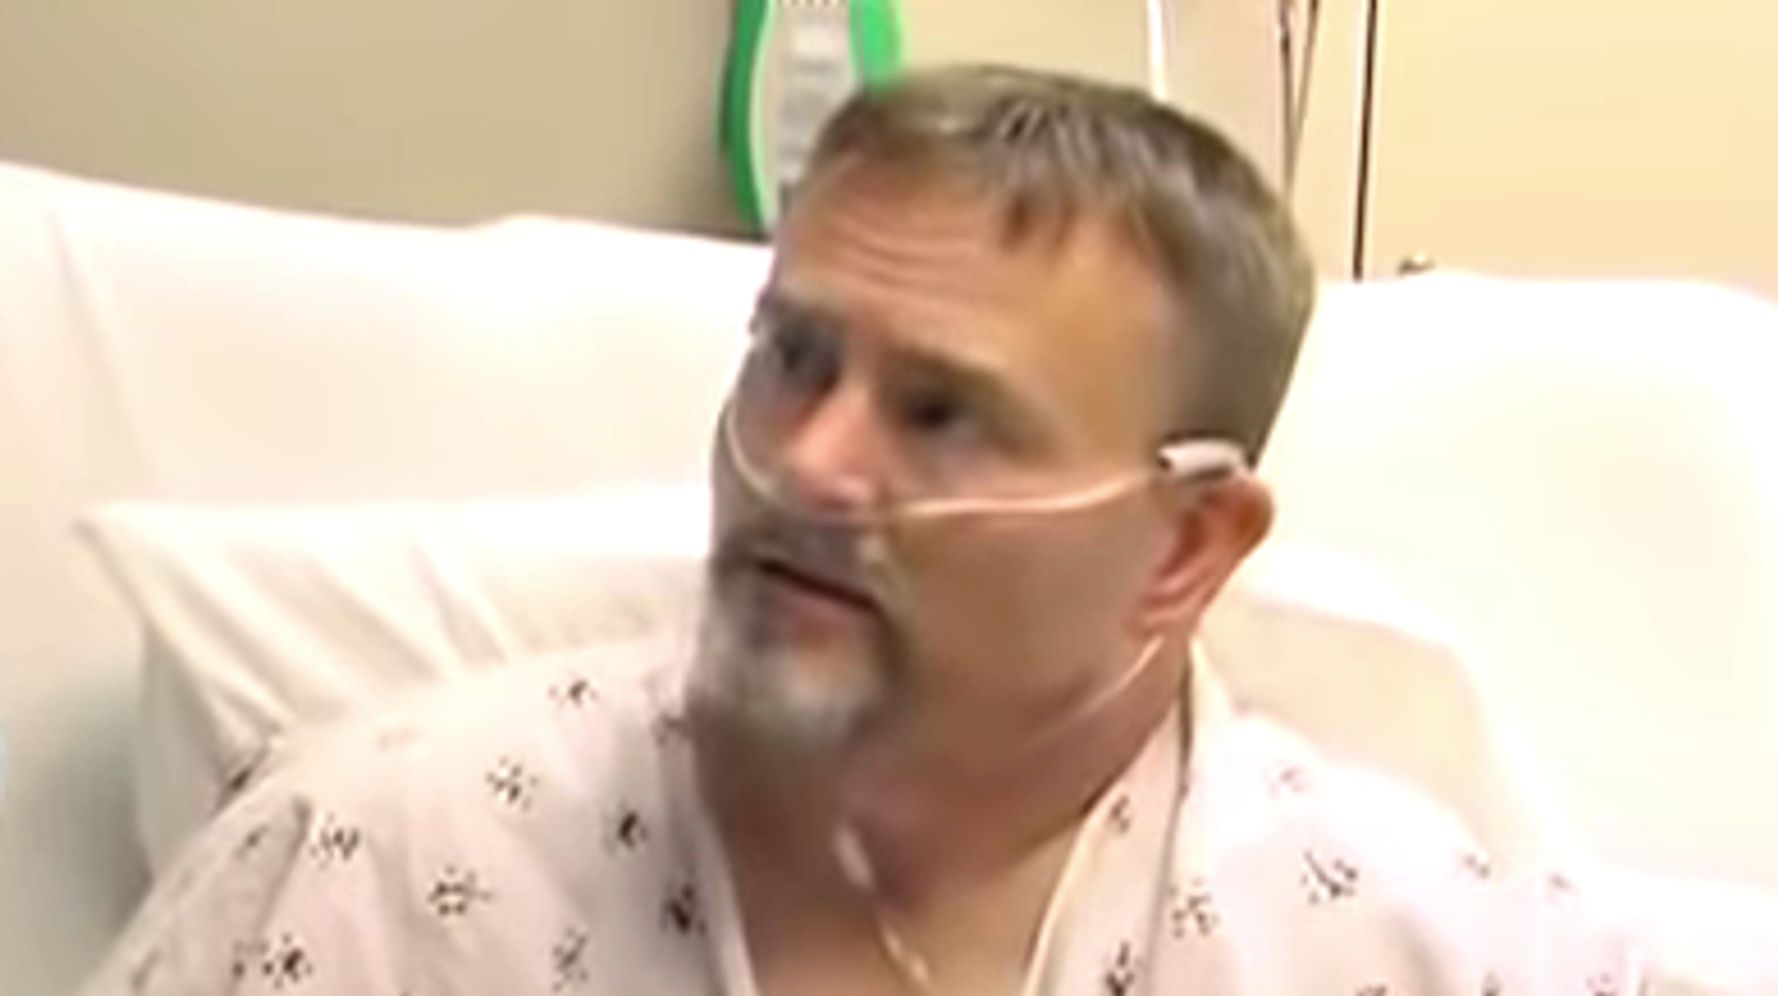 Unvaccinated Man Hospitalized With COVID-19 Still Refuses To Get The Vaccine